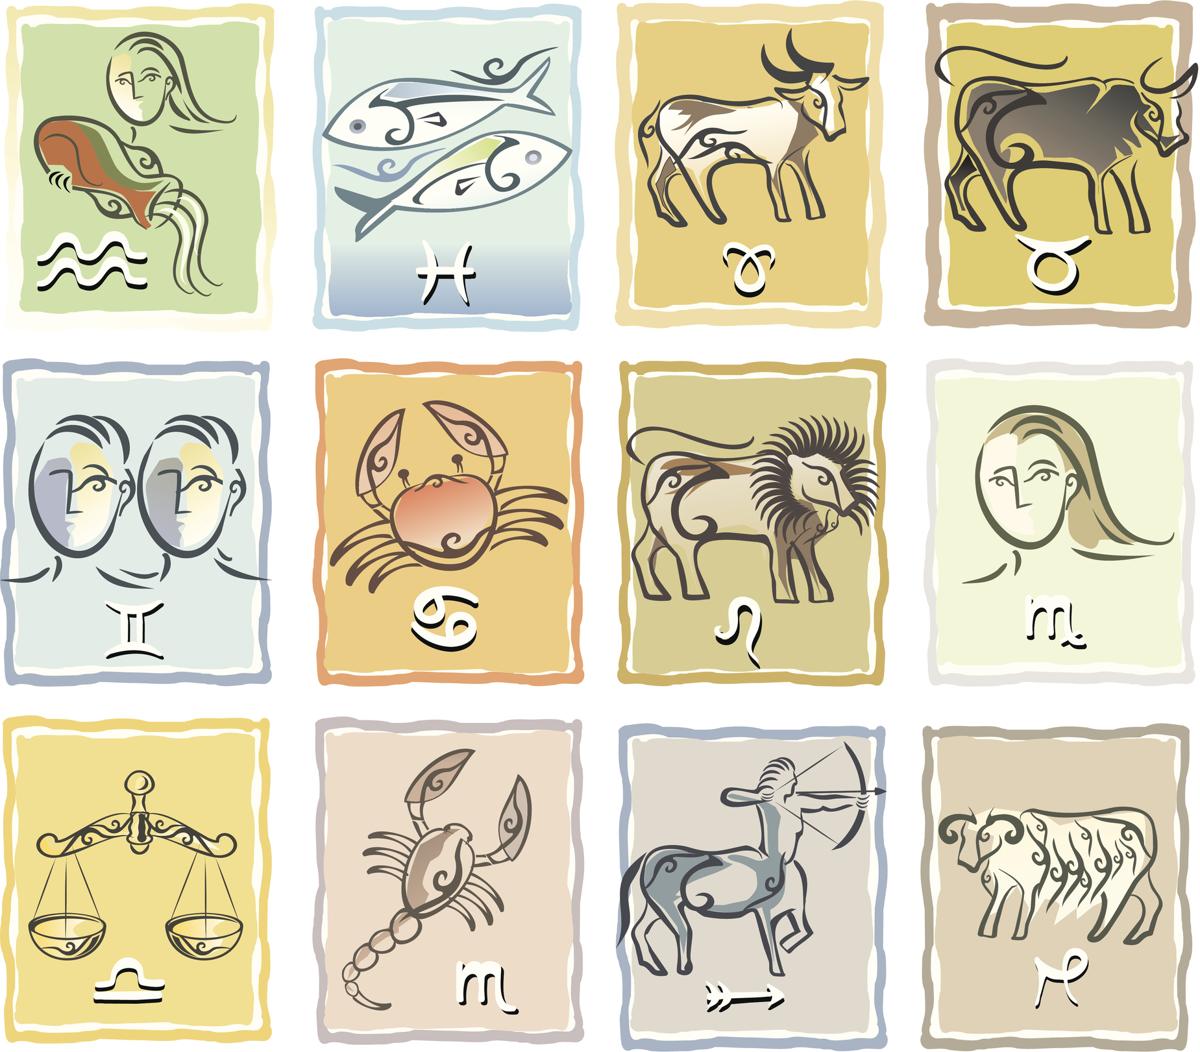 An Elaborate Explanation of Zodiac Signs and Their Meanings - Astrology Bay